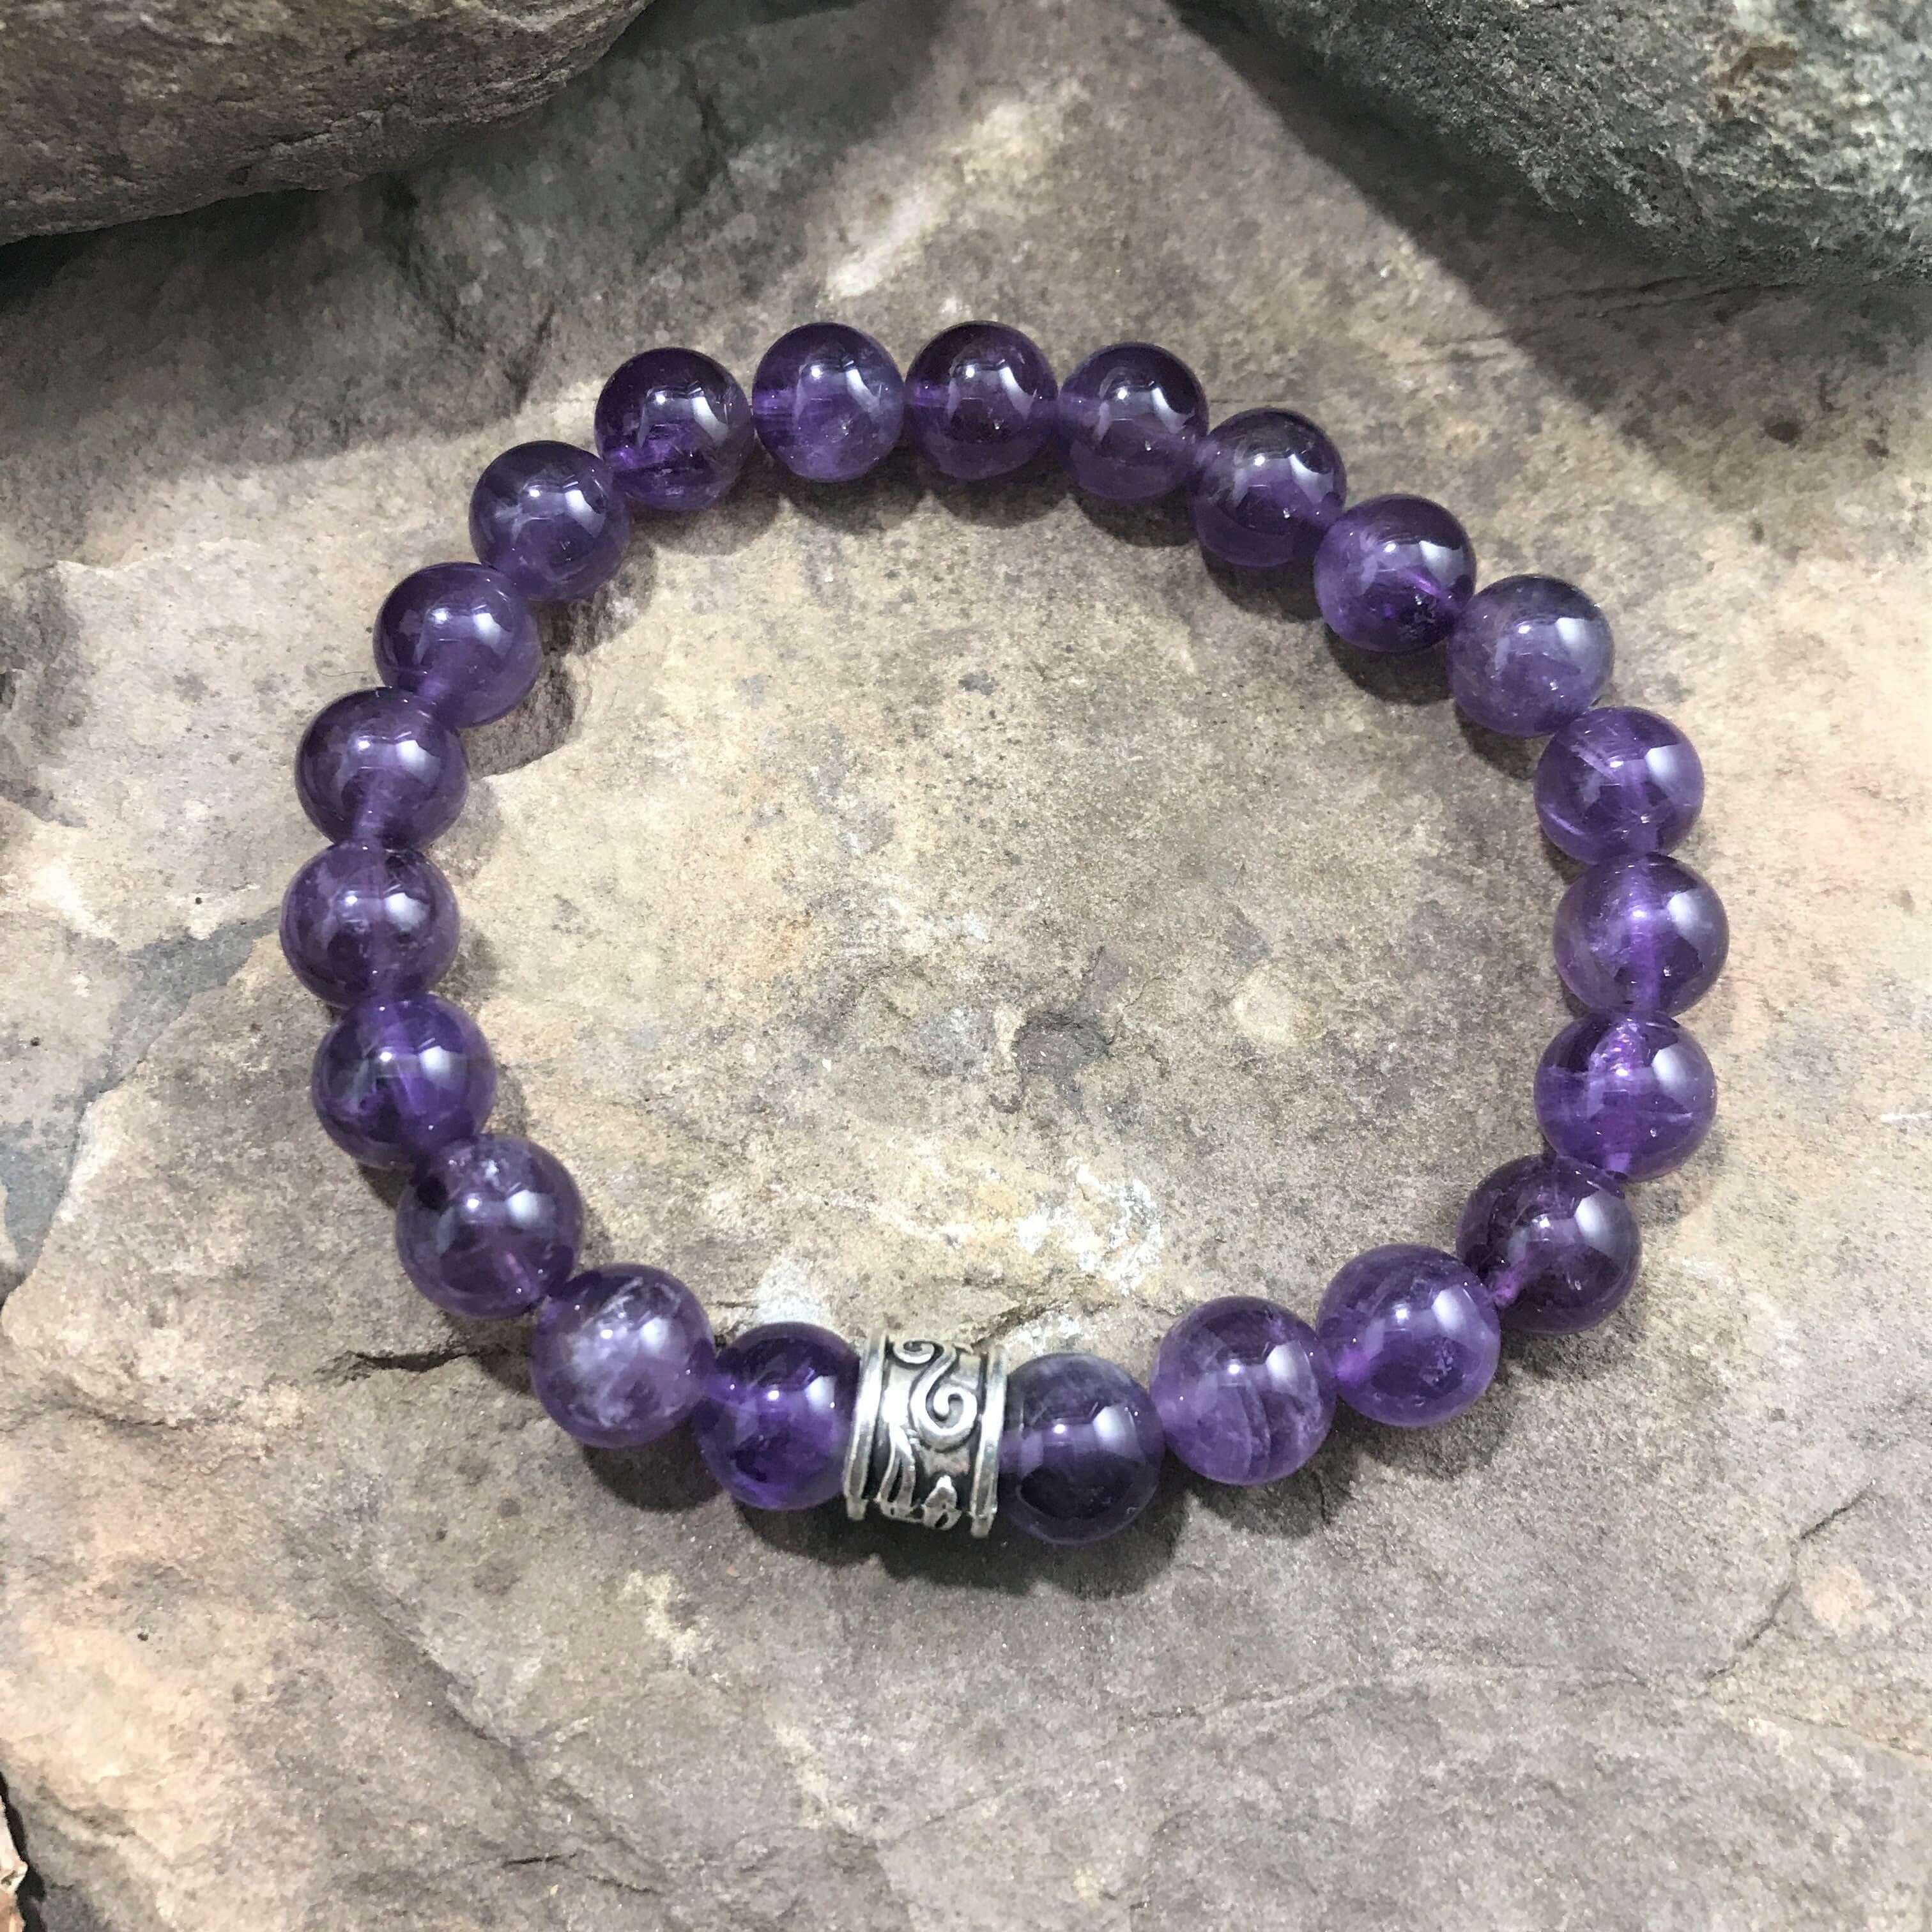 Amethyst Bead Bracelet This bracelet is made with high-quality Amethyst stones which bring serenity to the wearer. Zodiac: Aquarius. Chakras: Third Eye and Crown. Birthstone: February. Handmade with authentic crystals and gemstones in Minneapolis, MN.